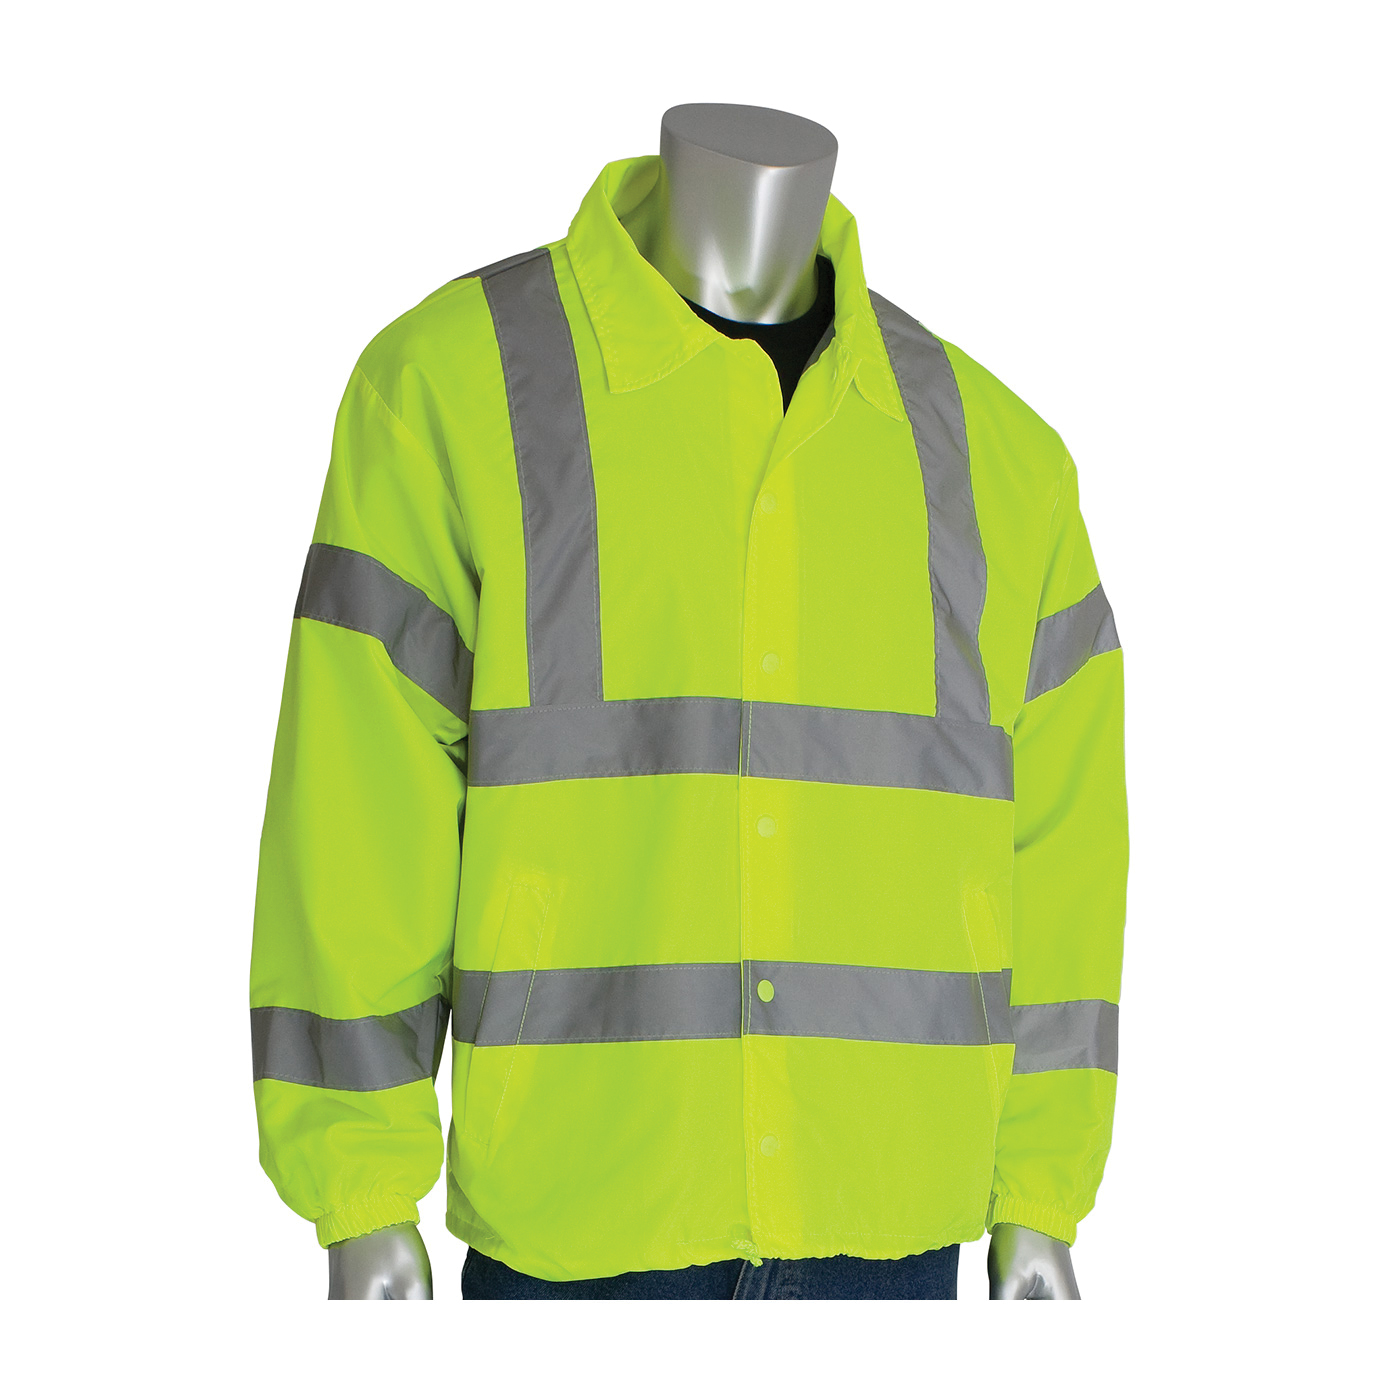 PIP® 333-WBLY-MD Classic Wind Breaker Jacket, Hi-Viz Lime Yellow, Polyester, 48.4 in Chest, Specifications Met: ANSI 107 Class 3 Type R